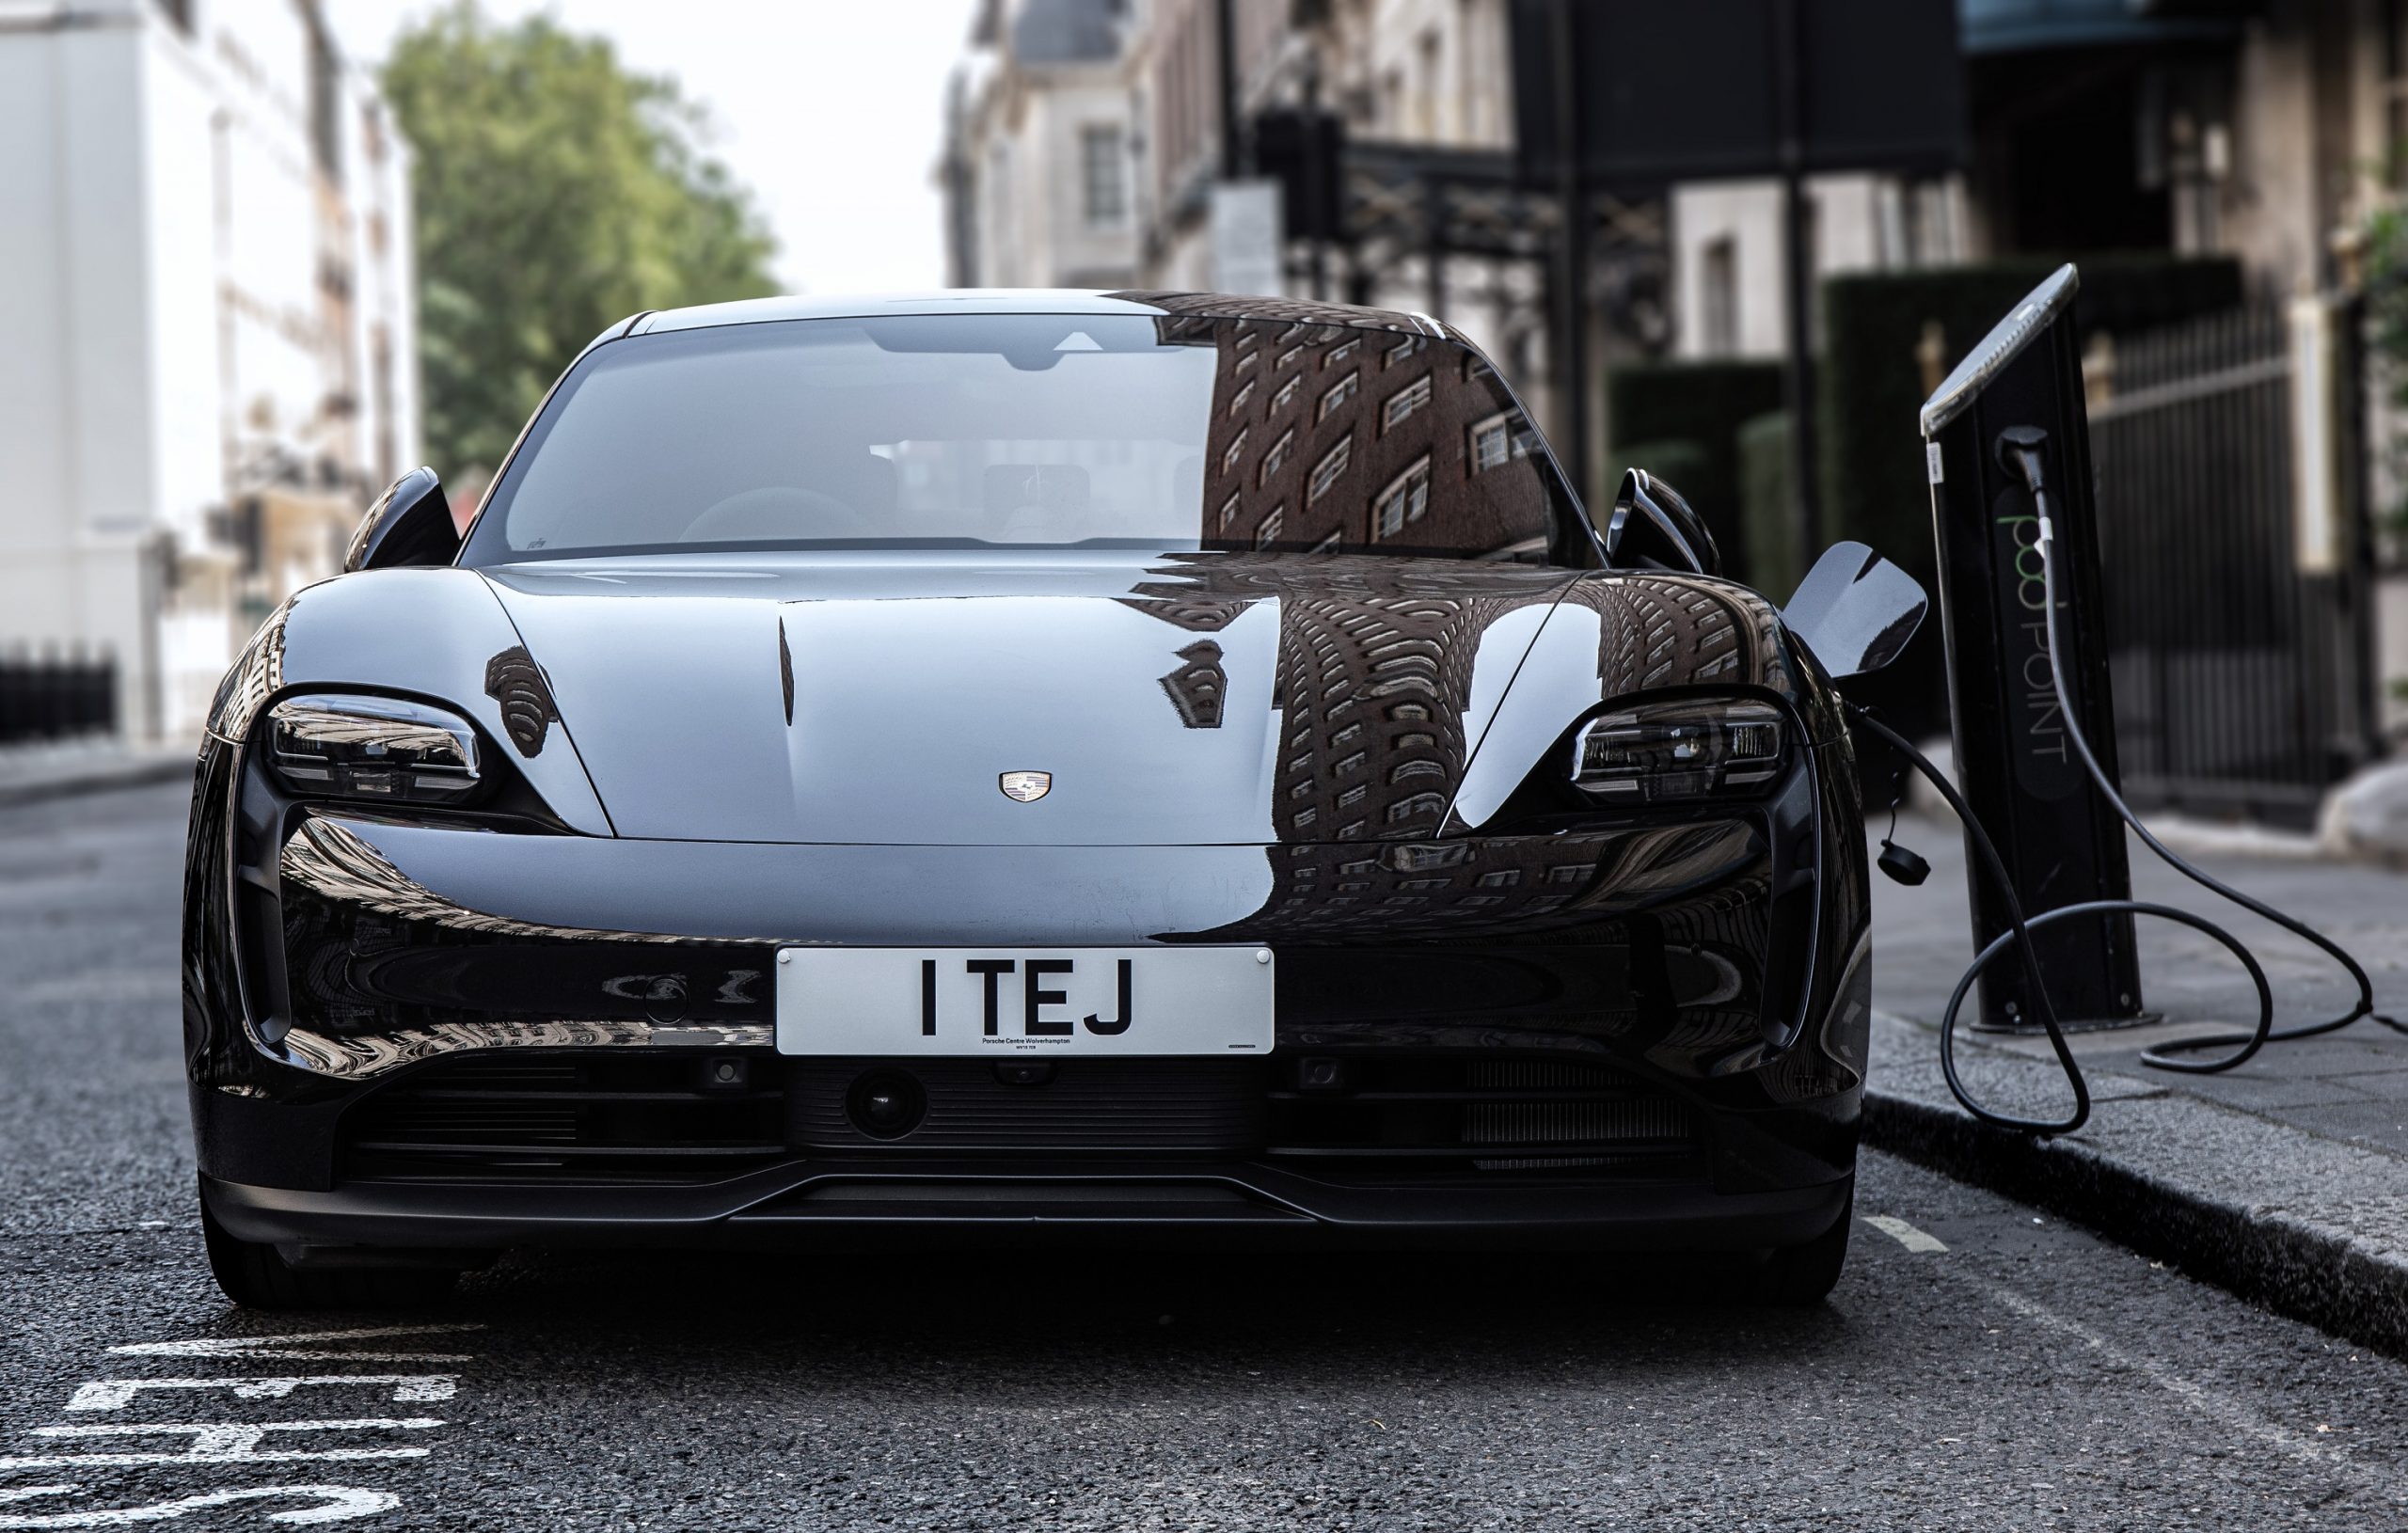 A black Porsche Taycan charging on the street in London, shot from the front